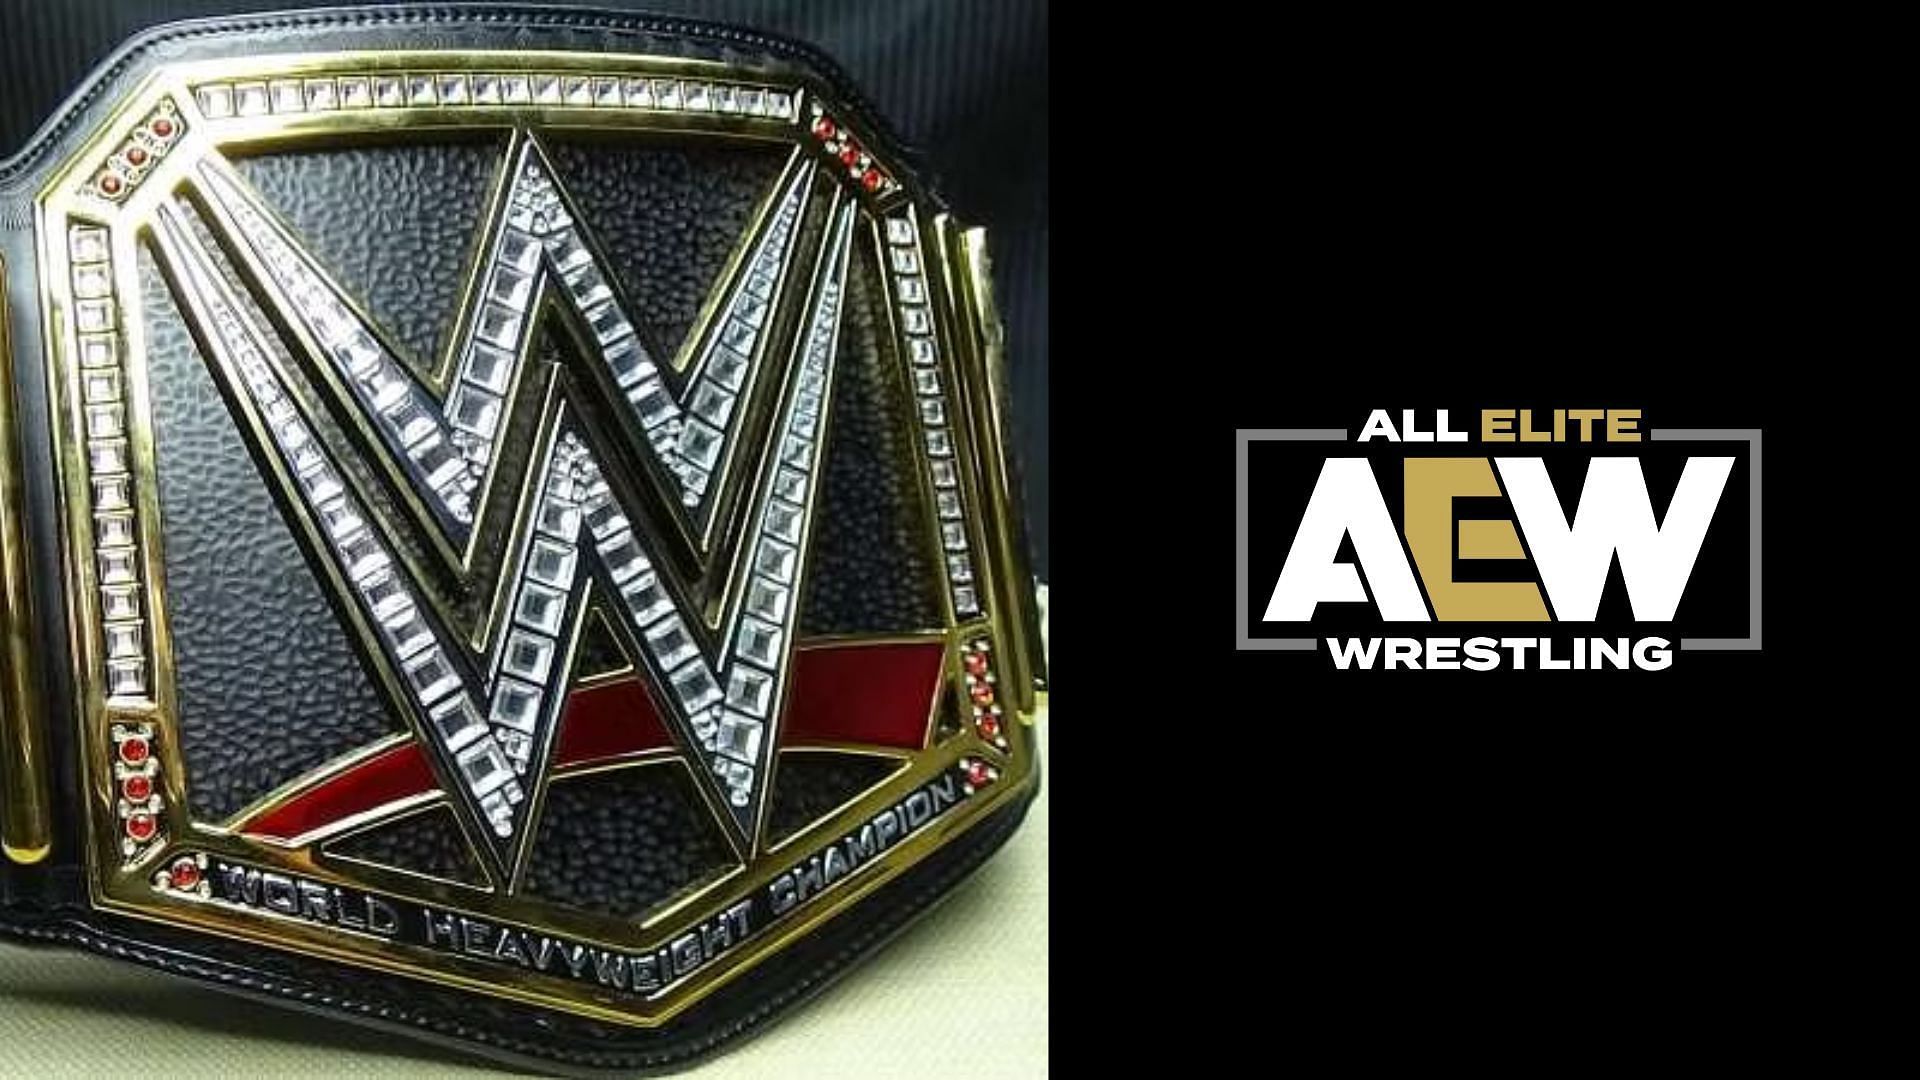 WWE Championship is one of the prestigious titles in sports entertainment